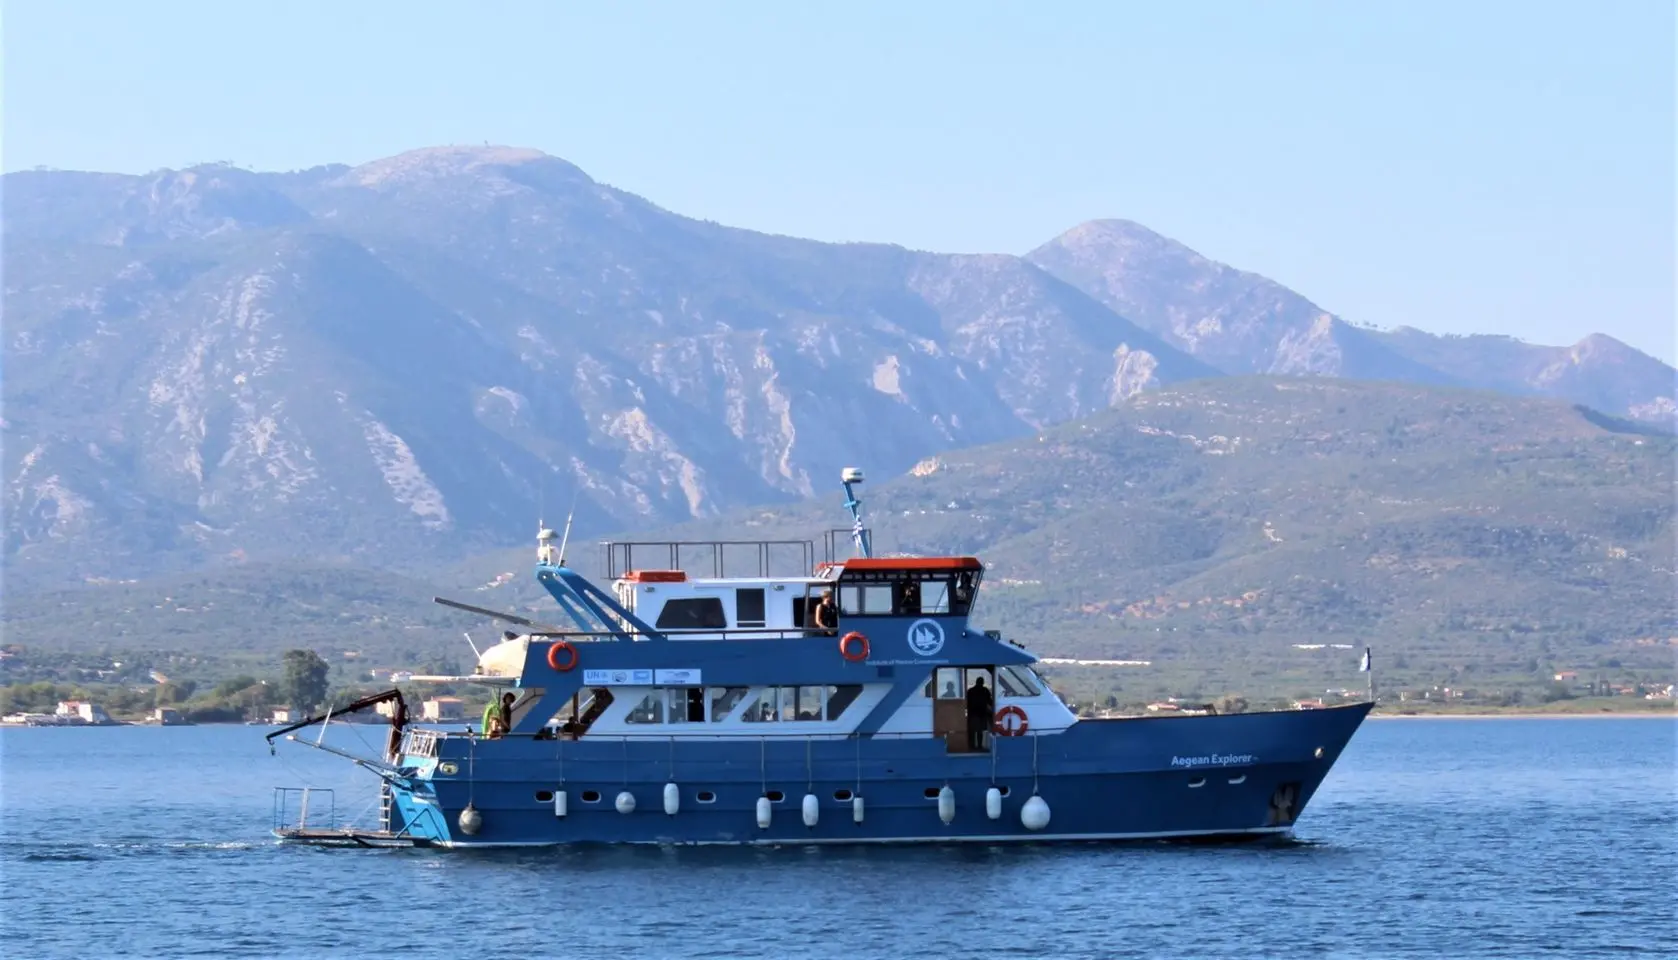 Aegean Explorer boat on the water